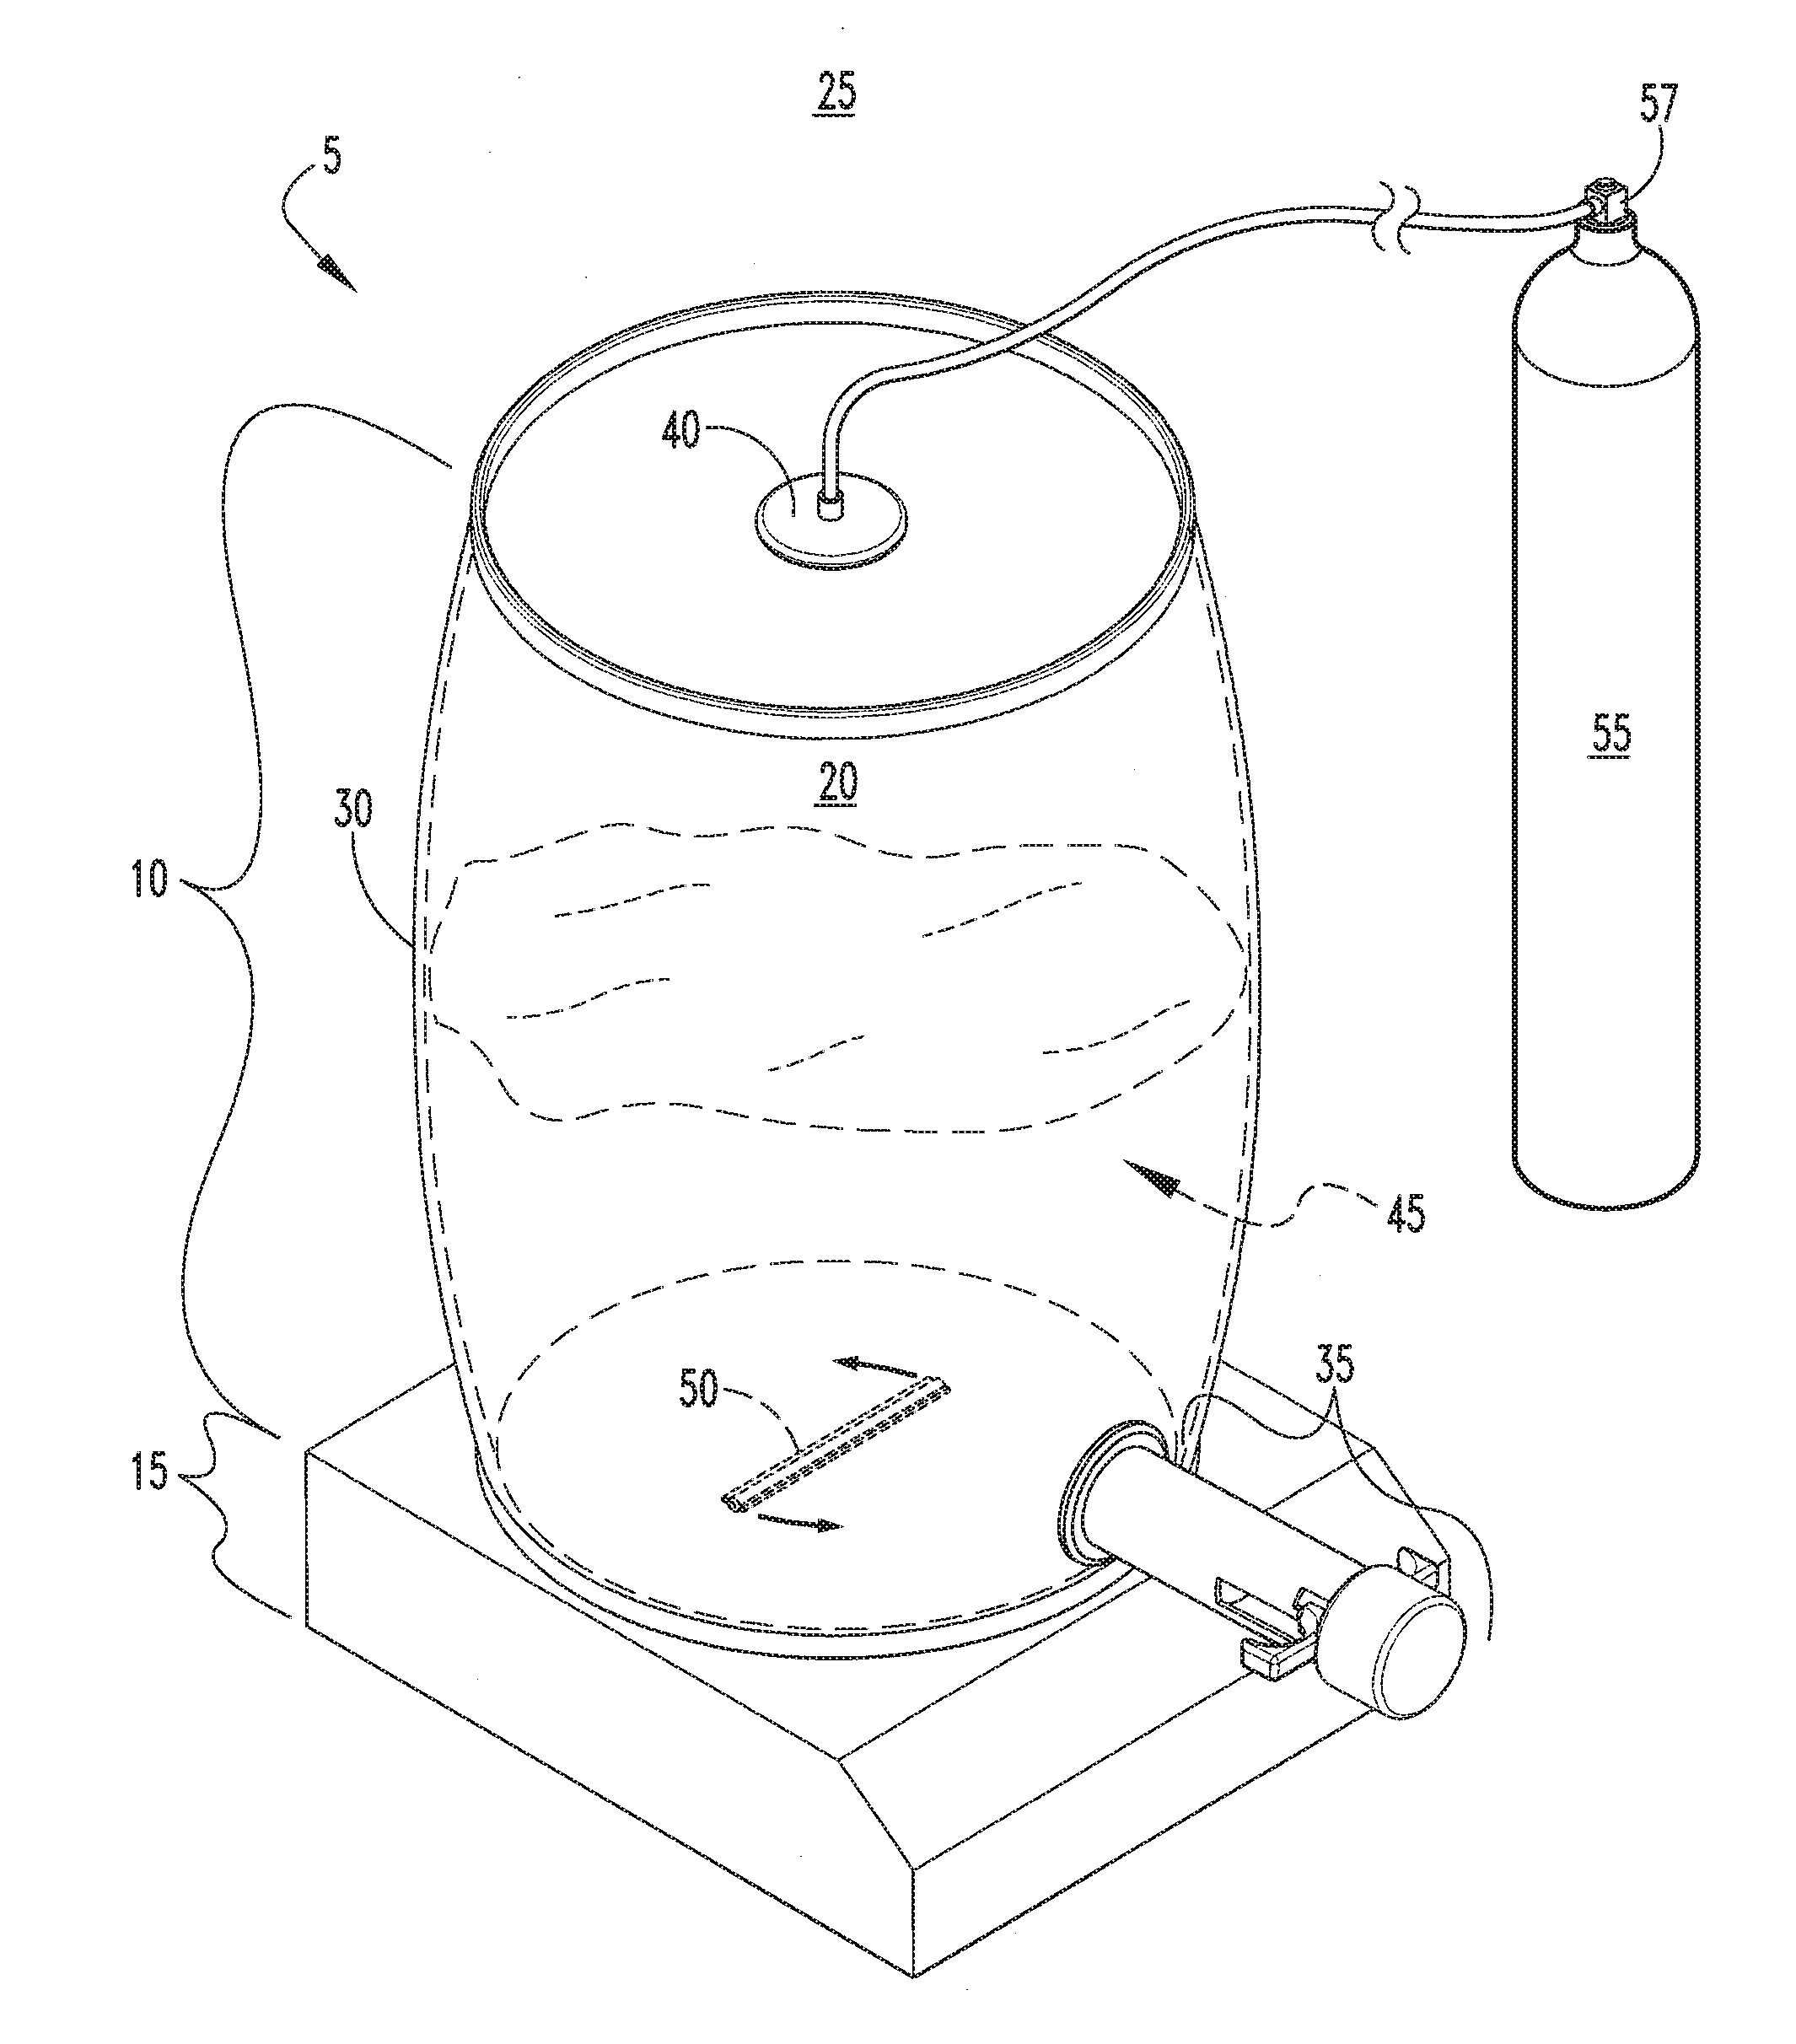 Systems and methods for distributing and dispensing chocolate